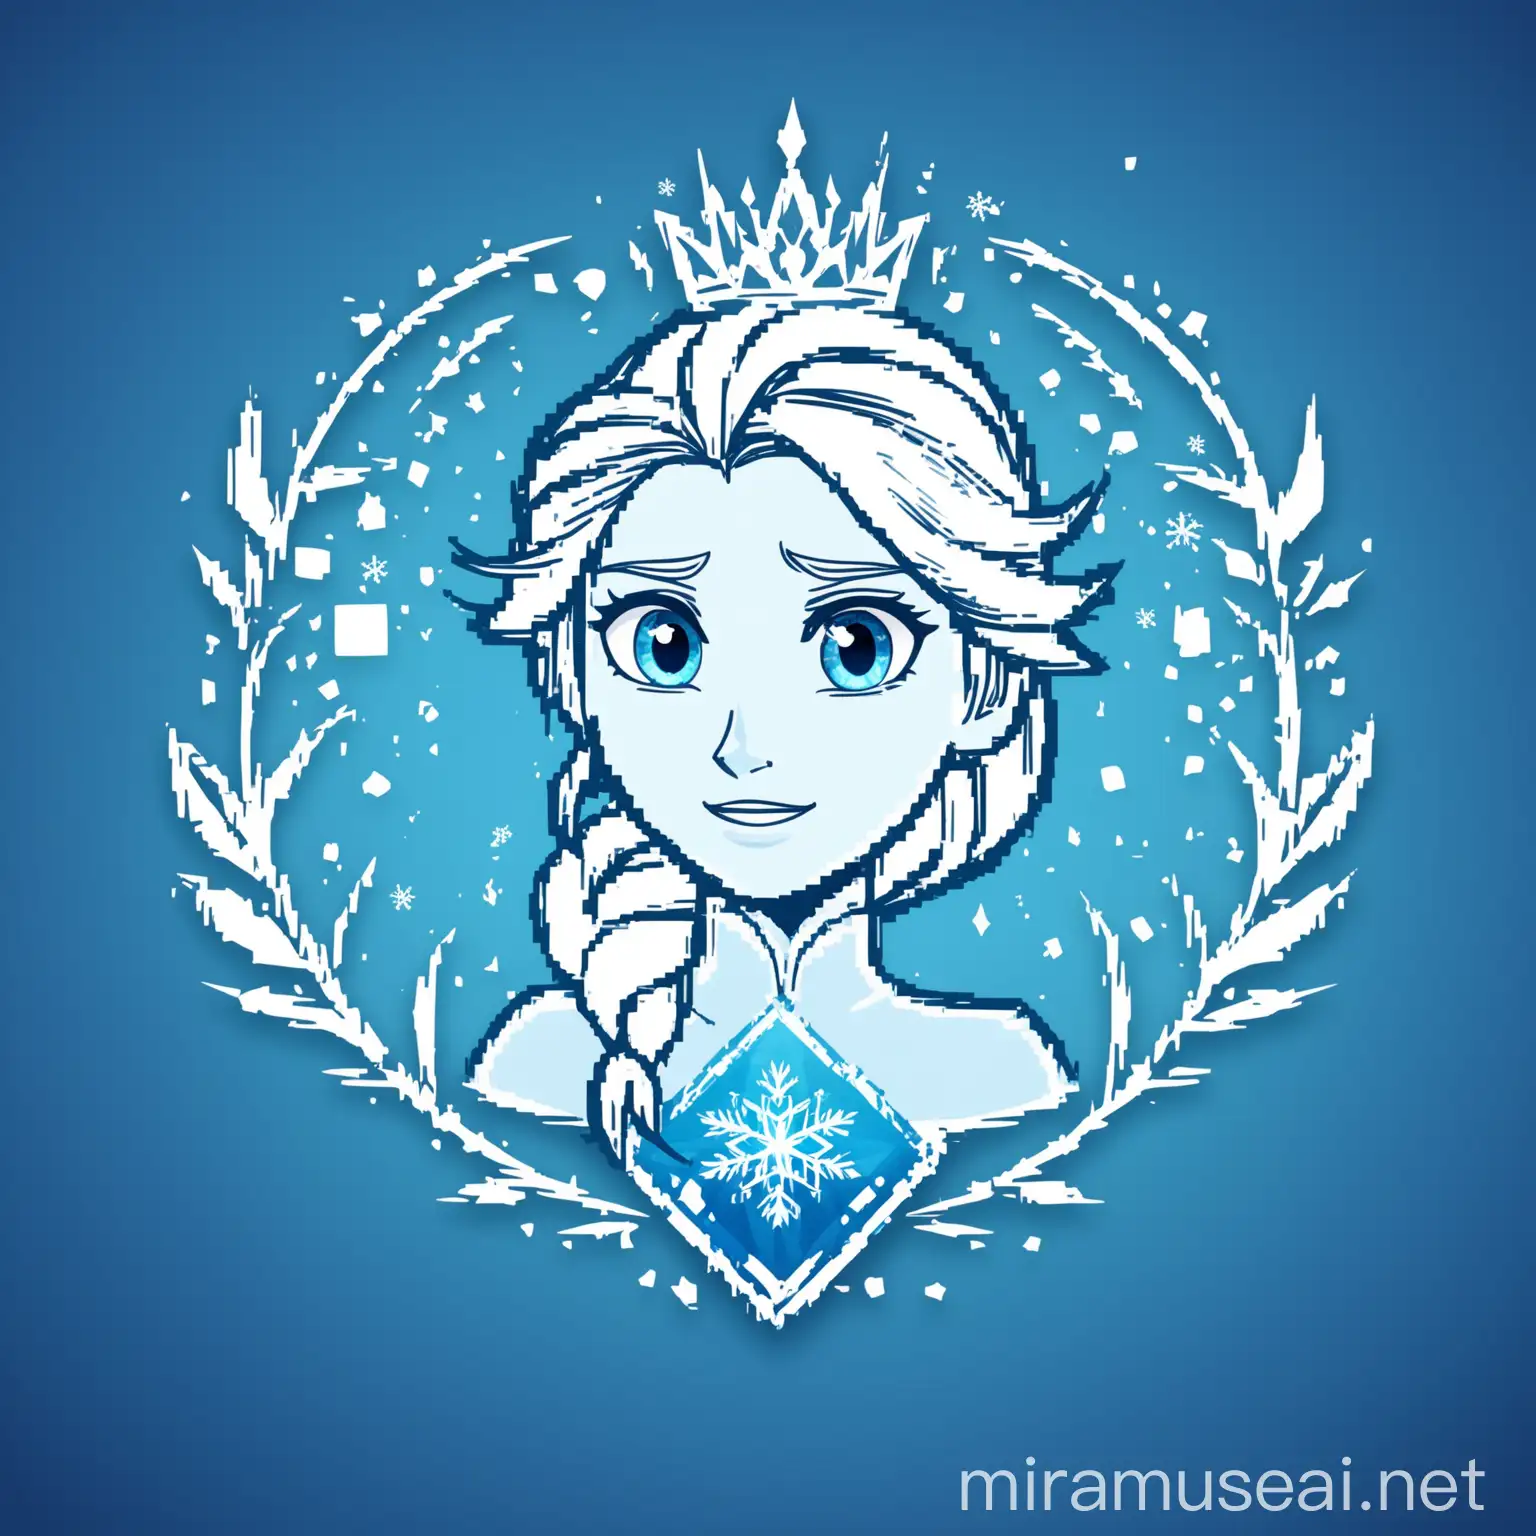 Elsa from Frozen Logo for Developers Empowering Your Brand with a Magical Touch